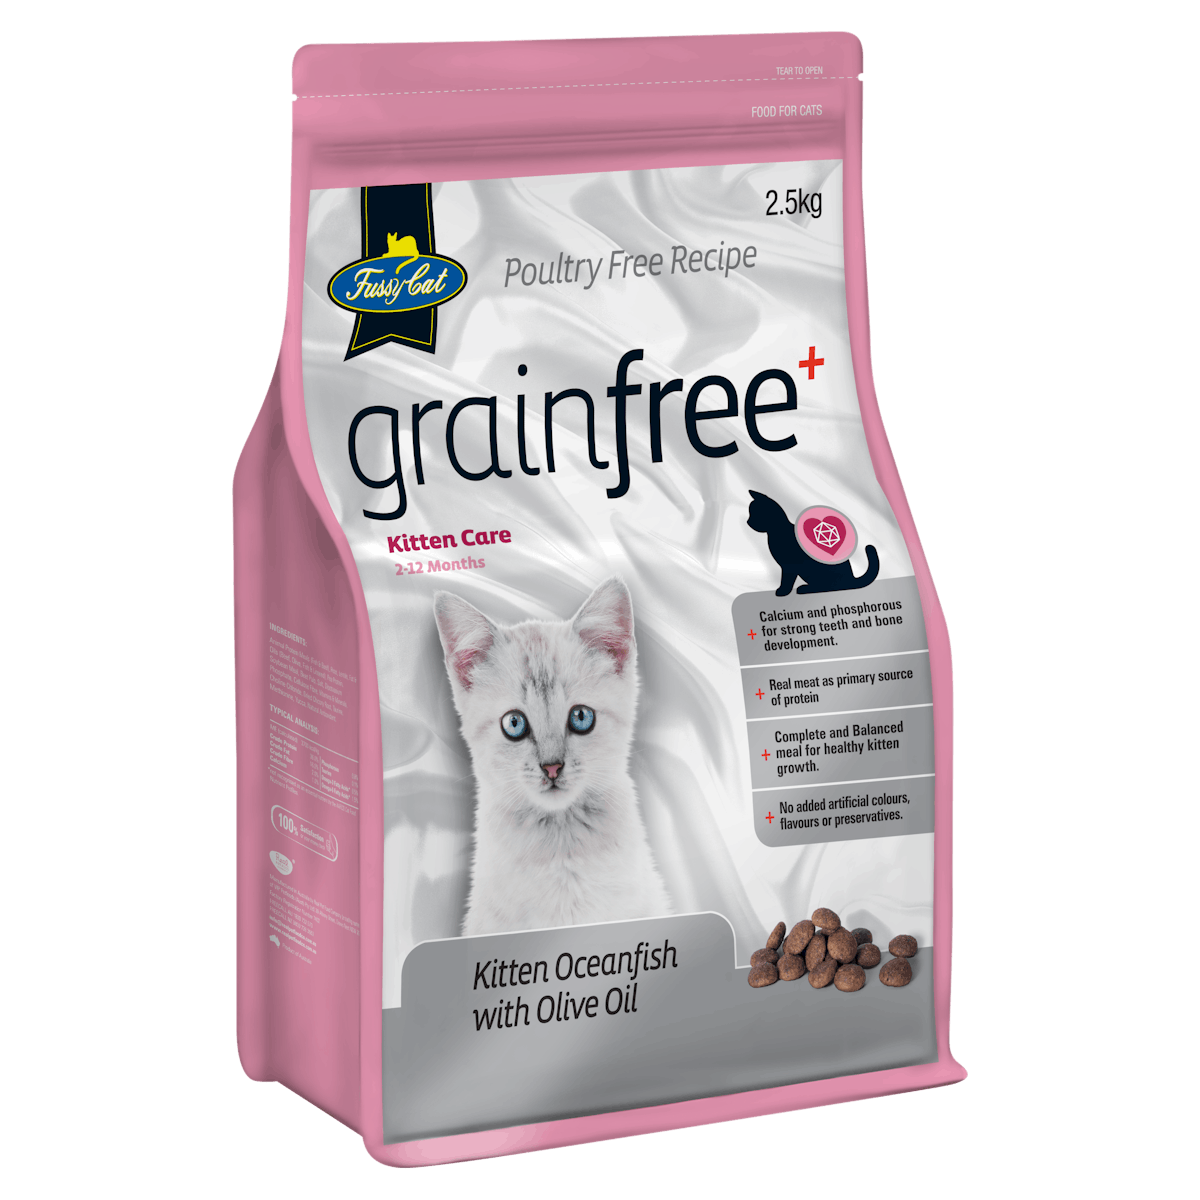 Fussy Cat | Kitten Oceanfish with Olive Oil | Dry cat food | Left of pack